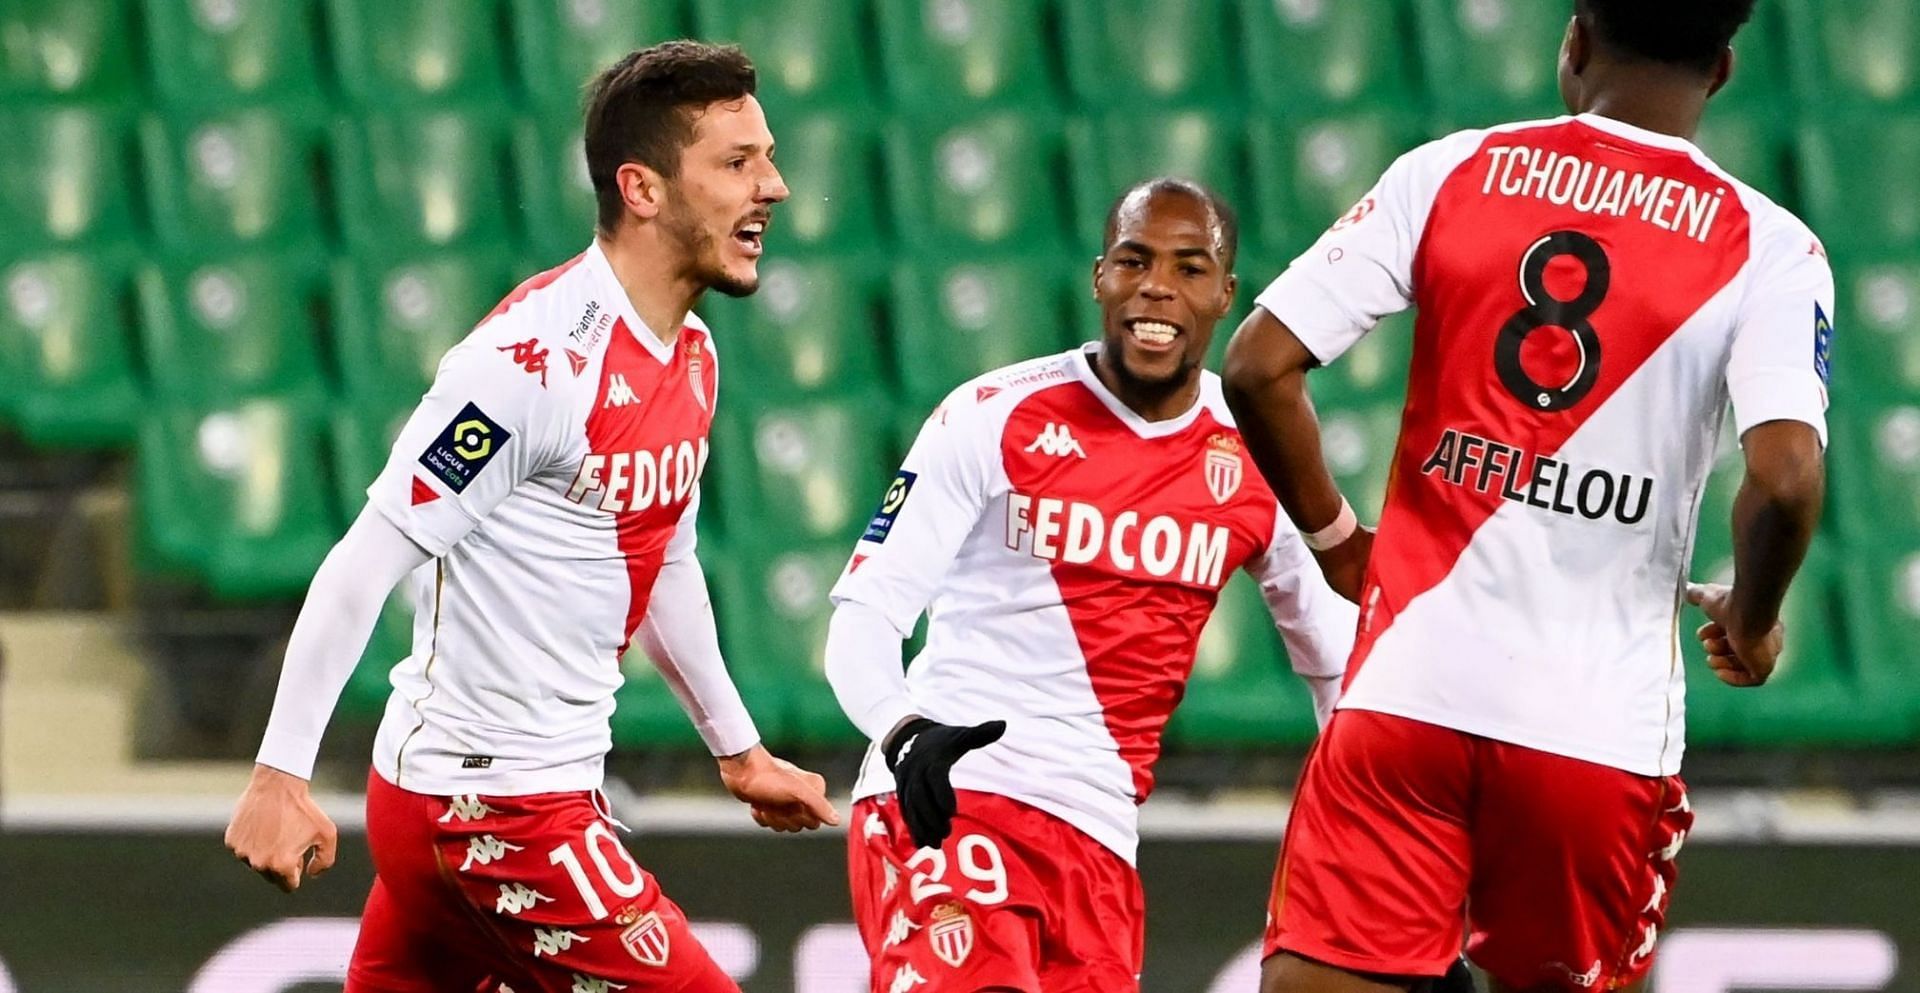 Monaco take on Metz in their upcoming Ligue 1 fixture on Sunday